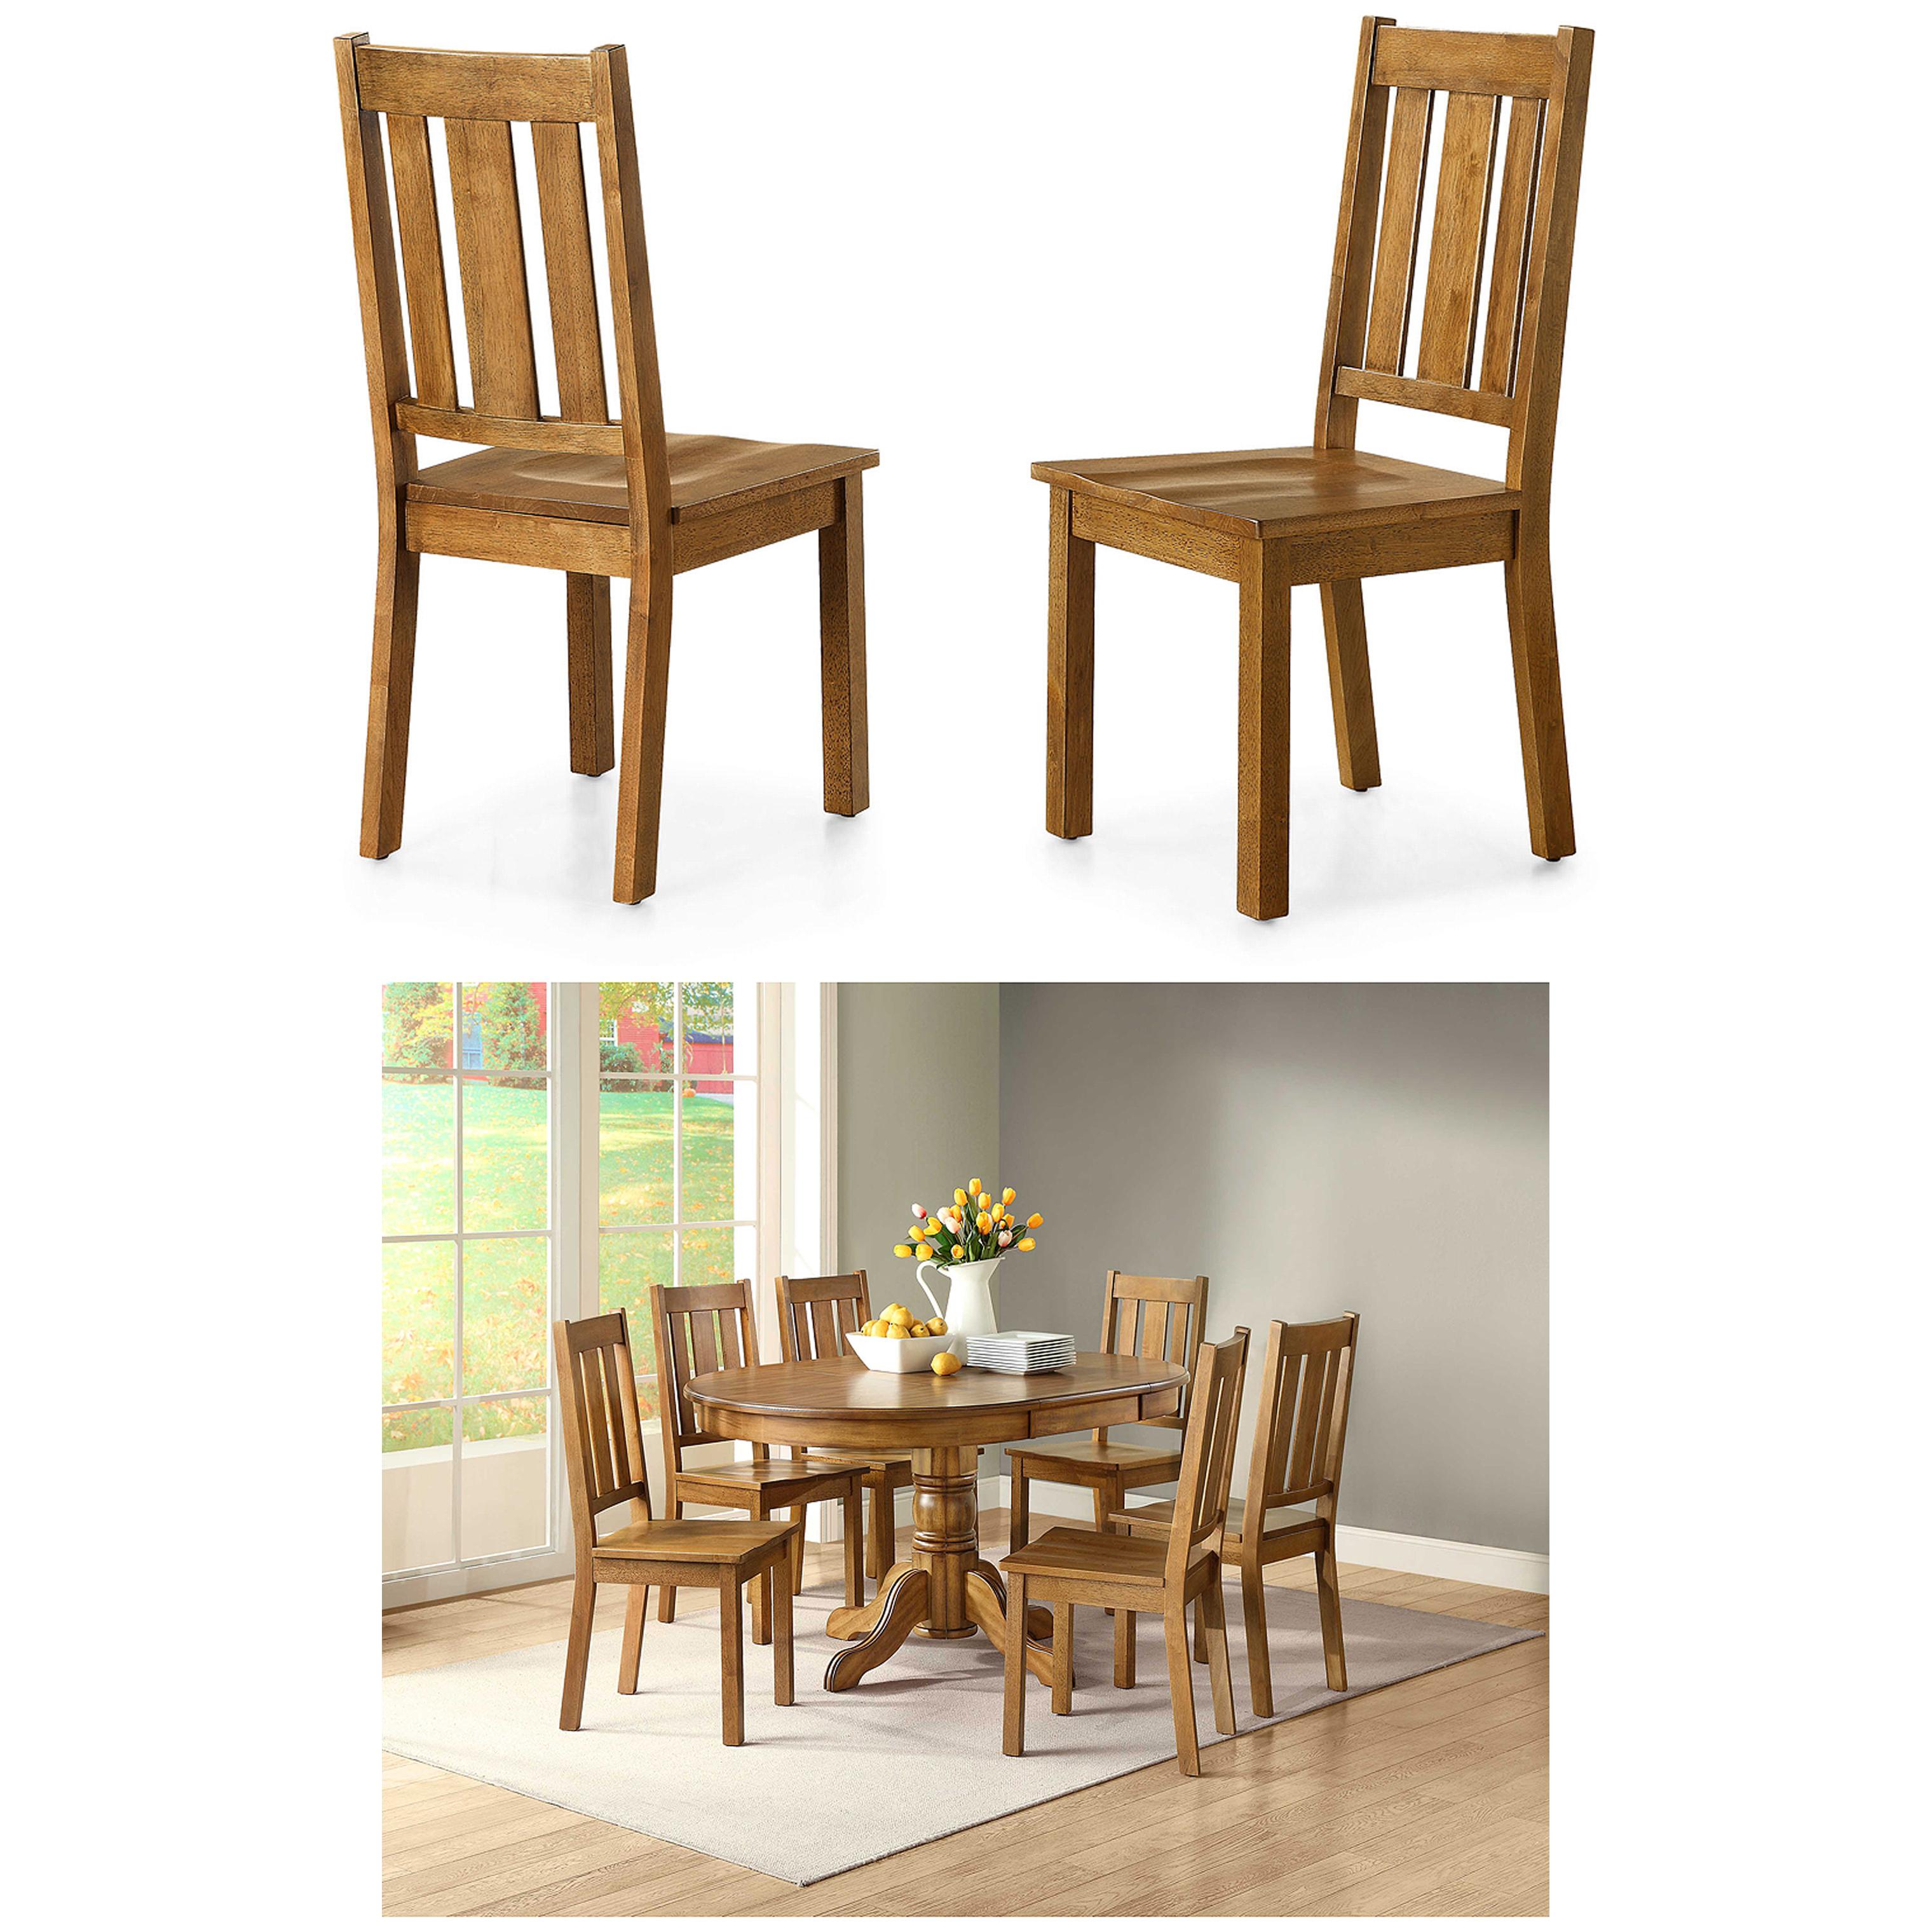 Better Homes and Gardens Cambridge 7-Piece Dining Set, Honey - image 1 of 3